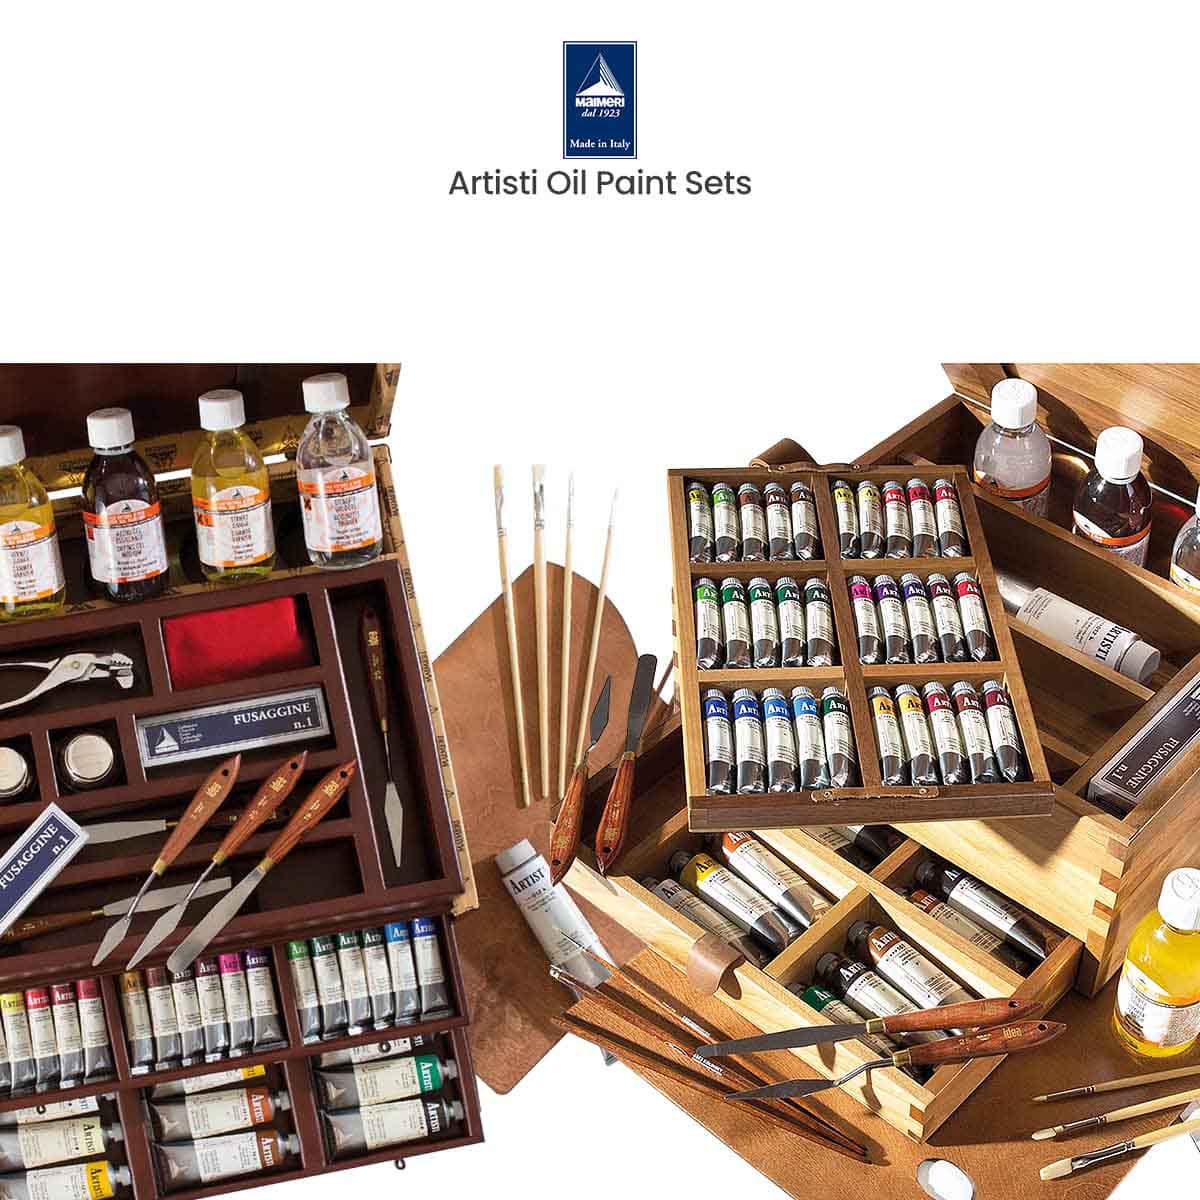 Bob Ross Oil Painting Master Paint Set + 12x16 Canvas Panel Pack of 3 +  Rambler Table Easel